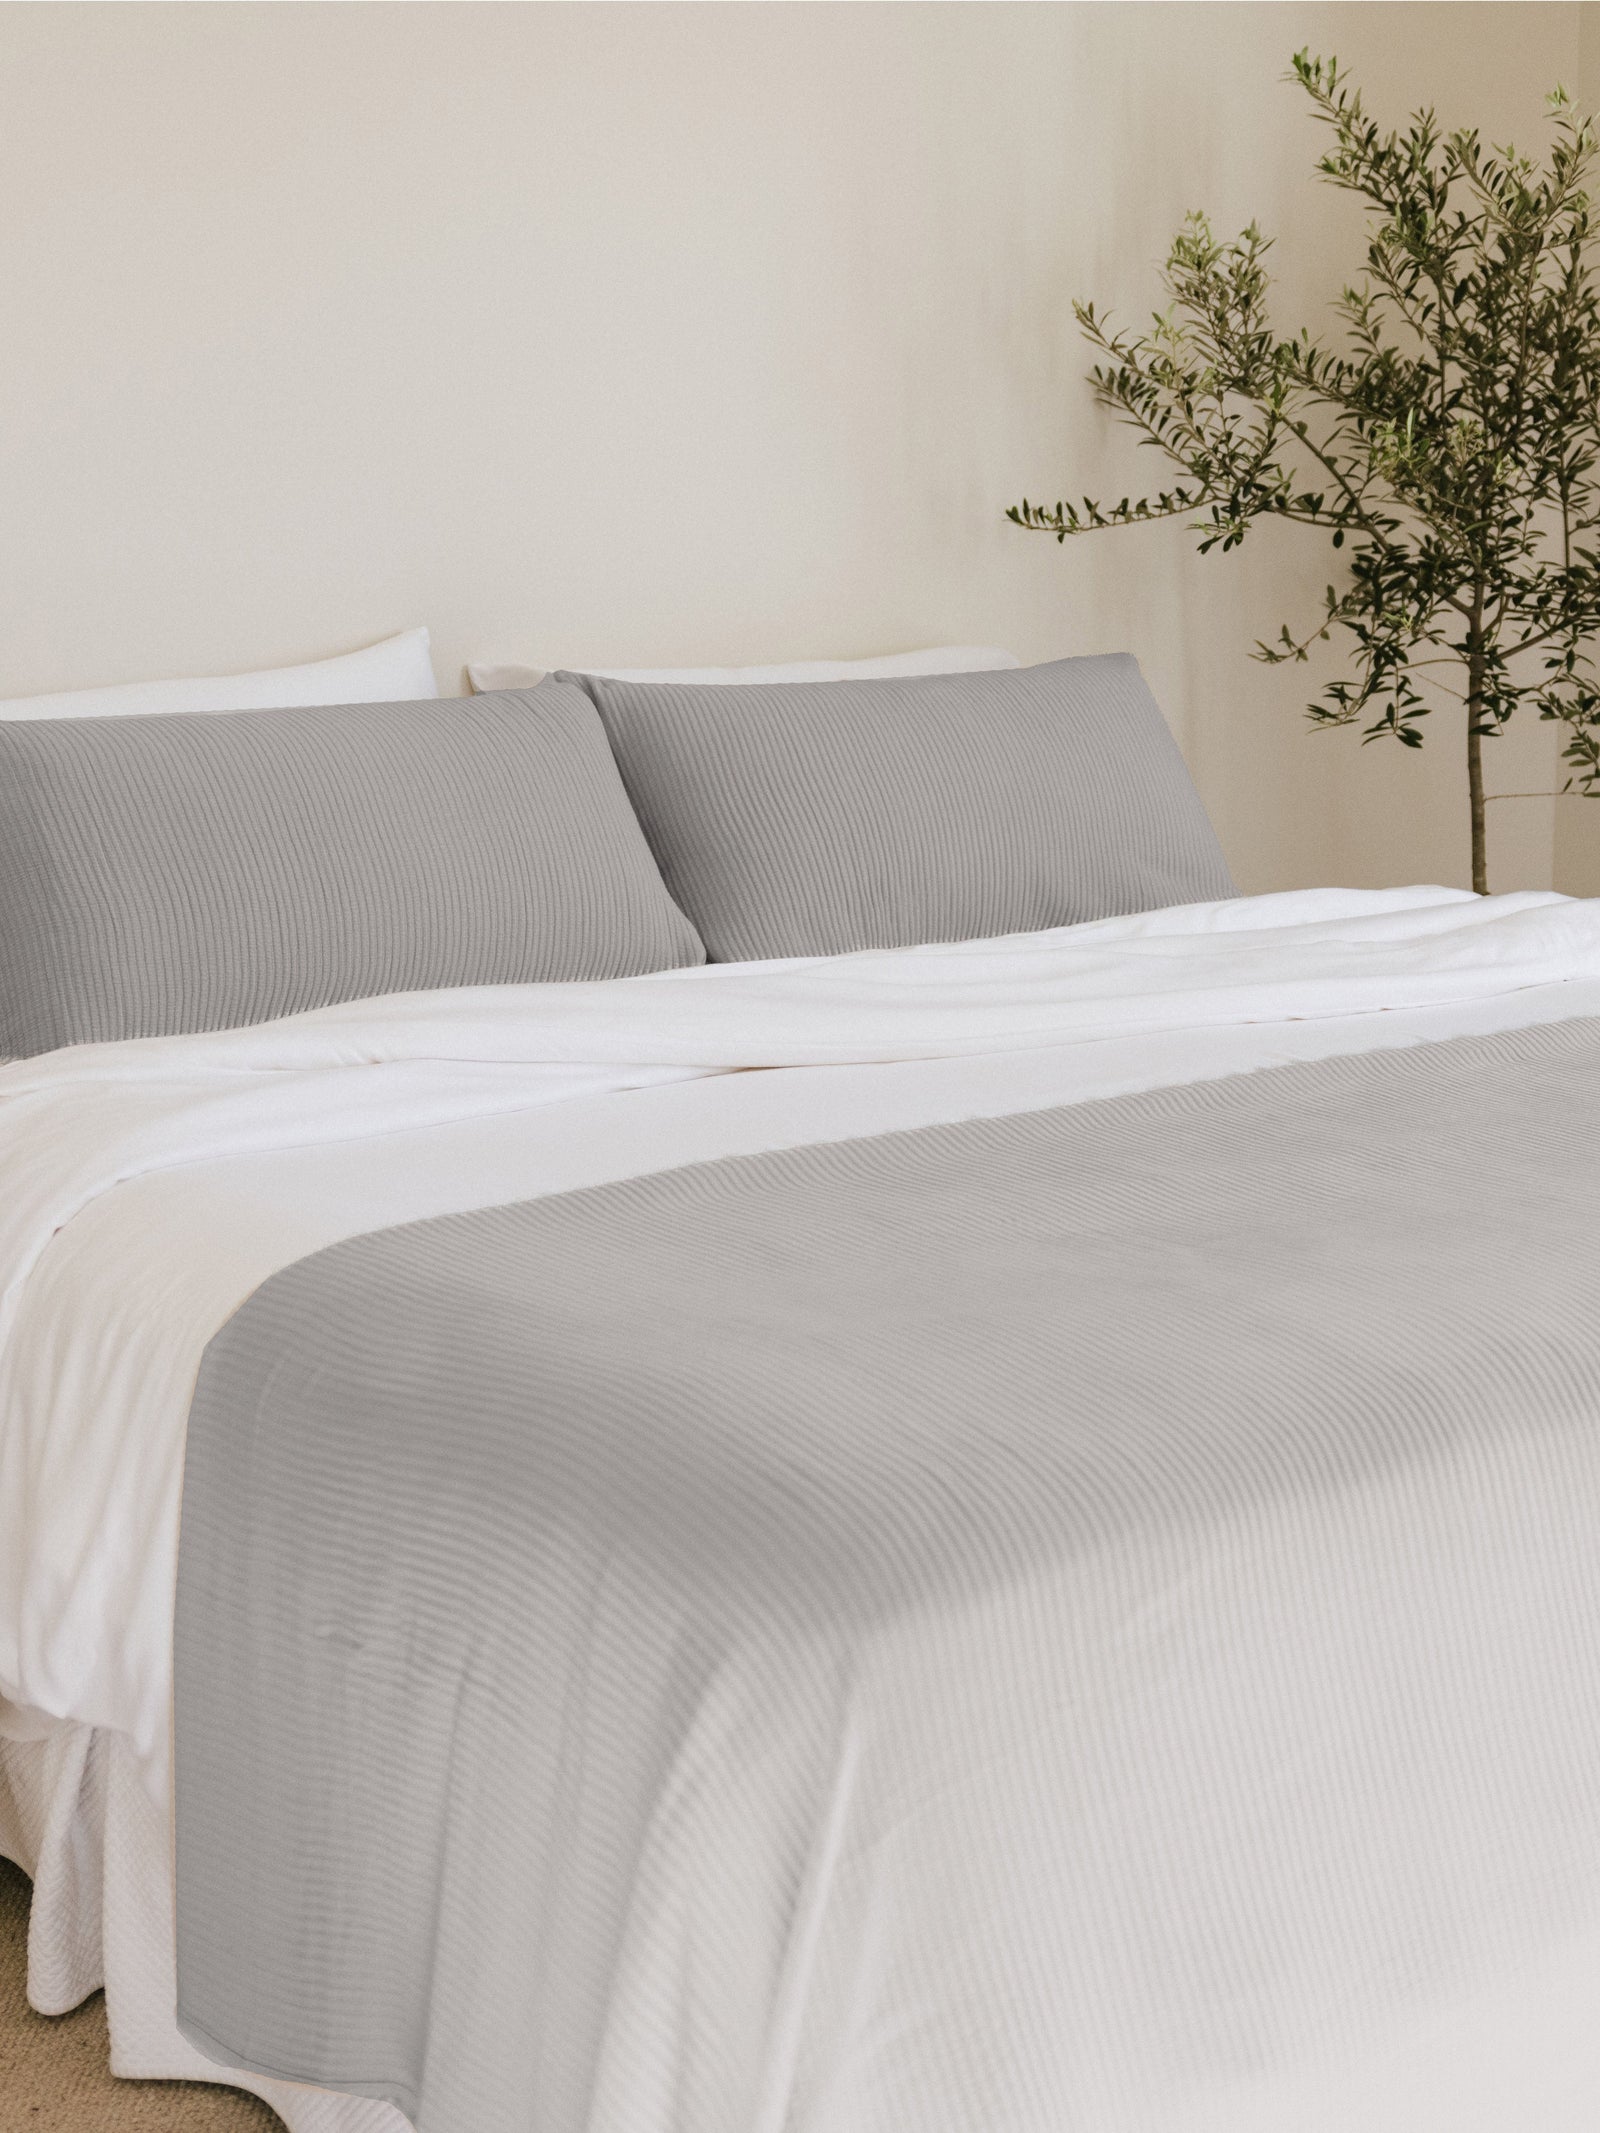 Light Grey coverlet and shams on a bed 